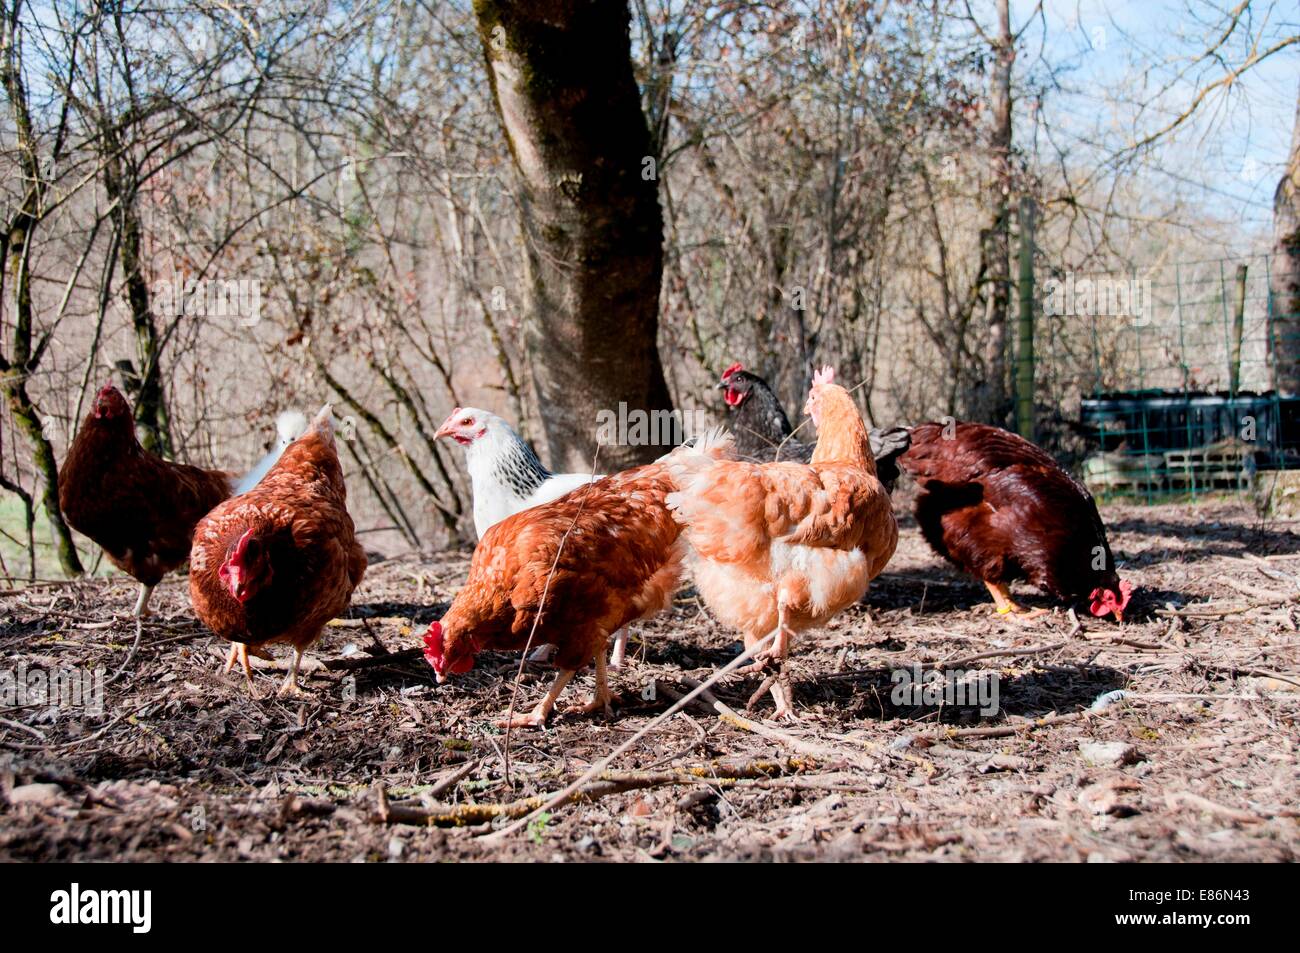 Chickens on a farm Stock Photo